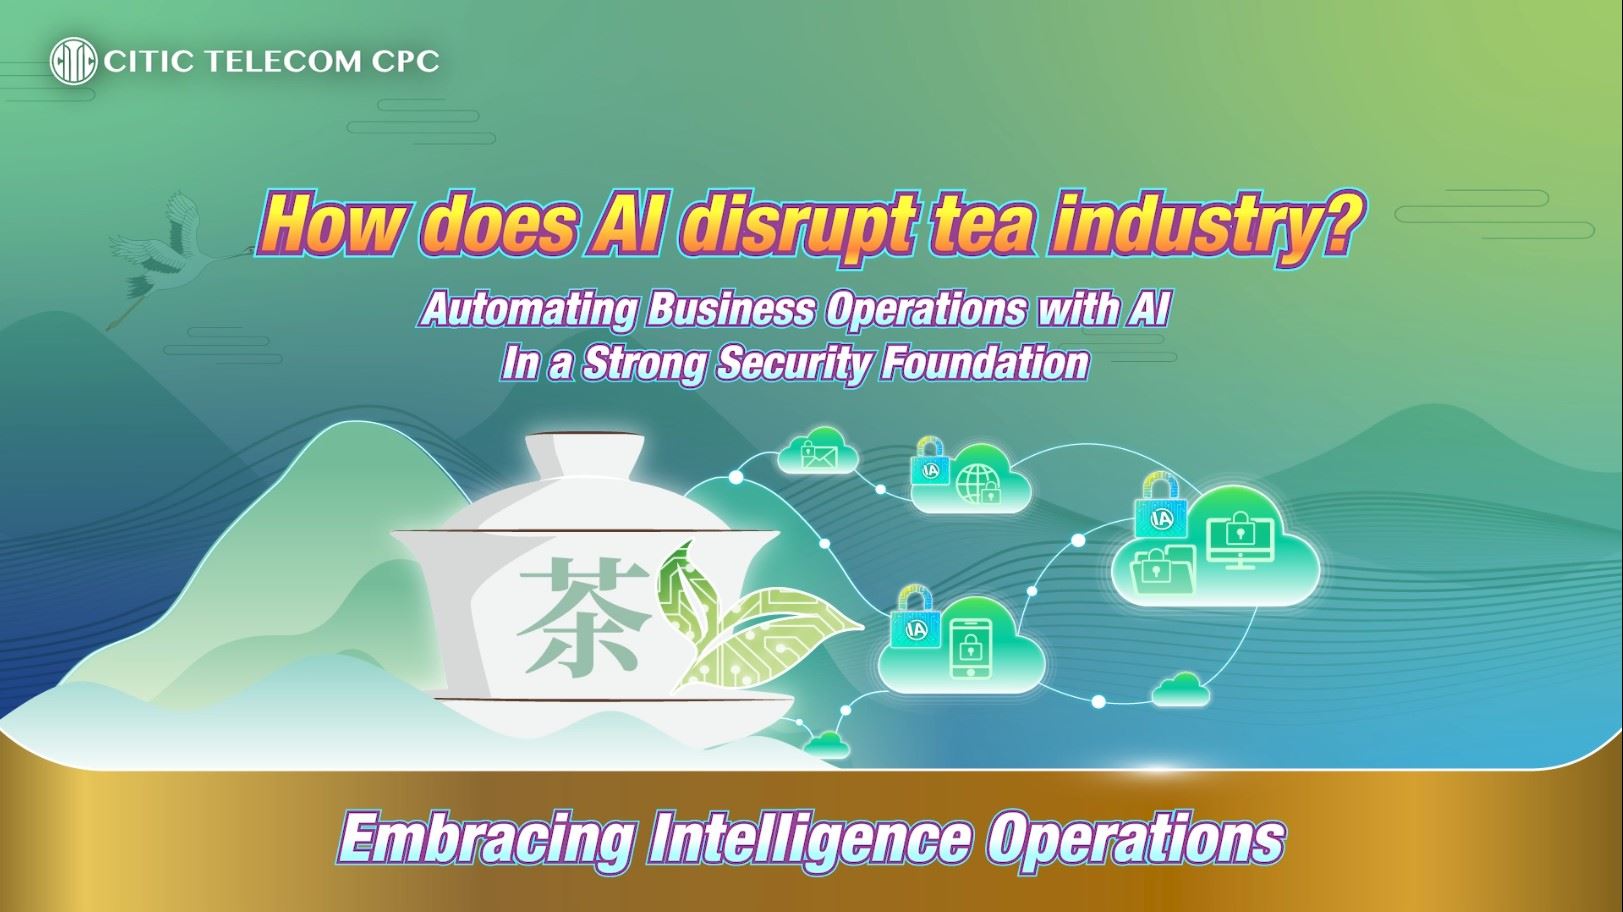 Embracing Intelligent Operations:  Automating Business Operations with AI in a Strong Security Foundation